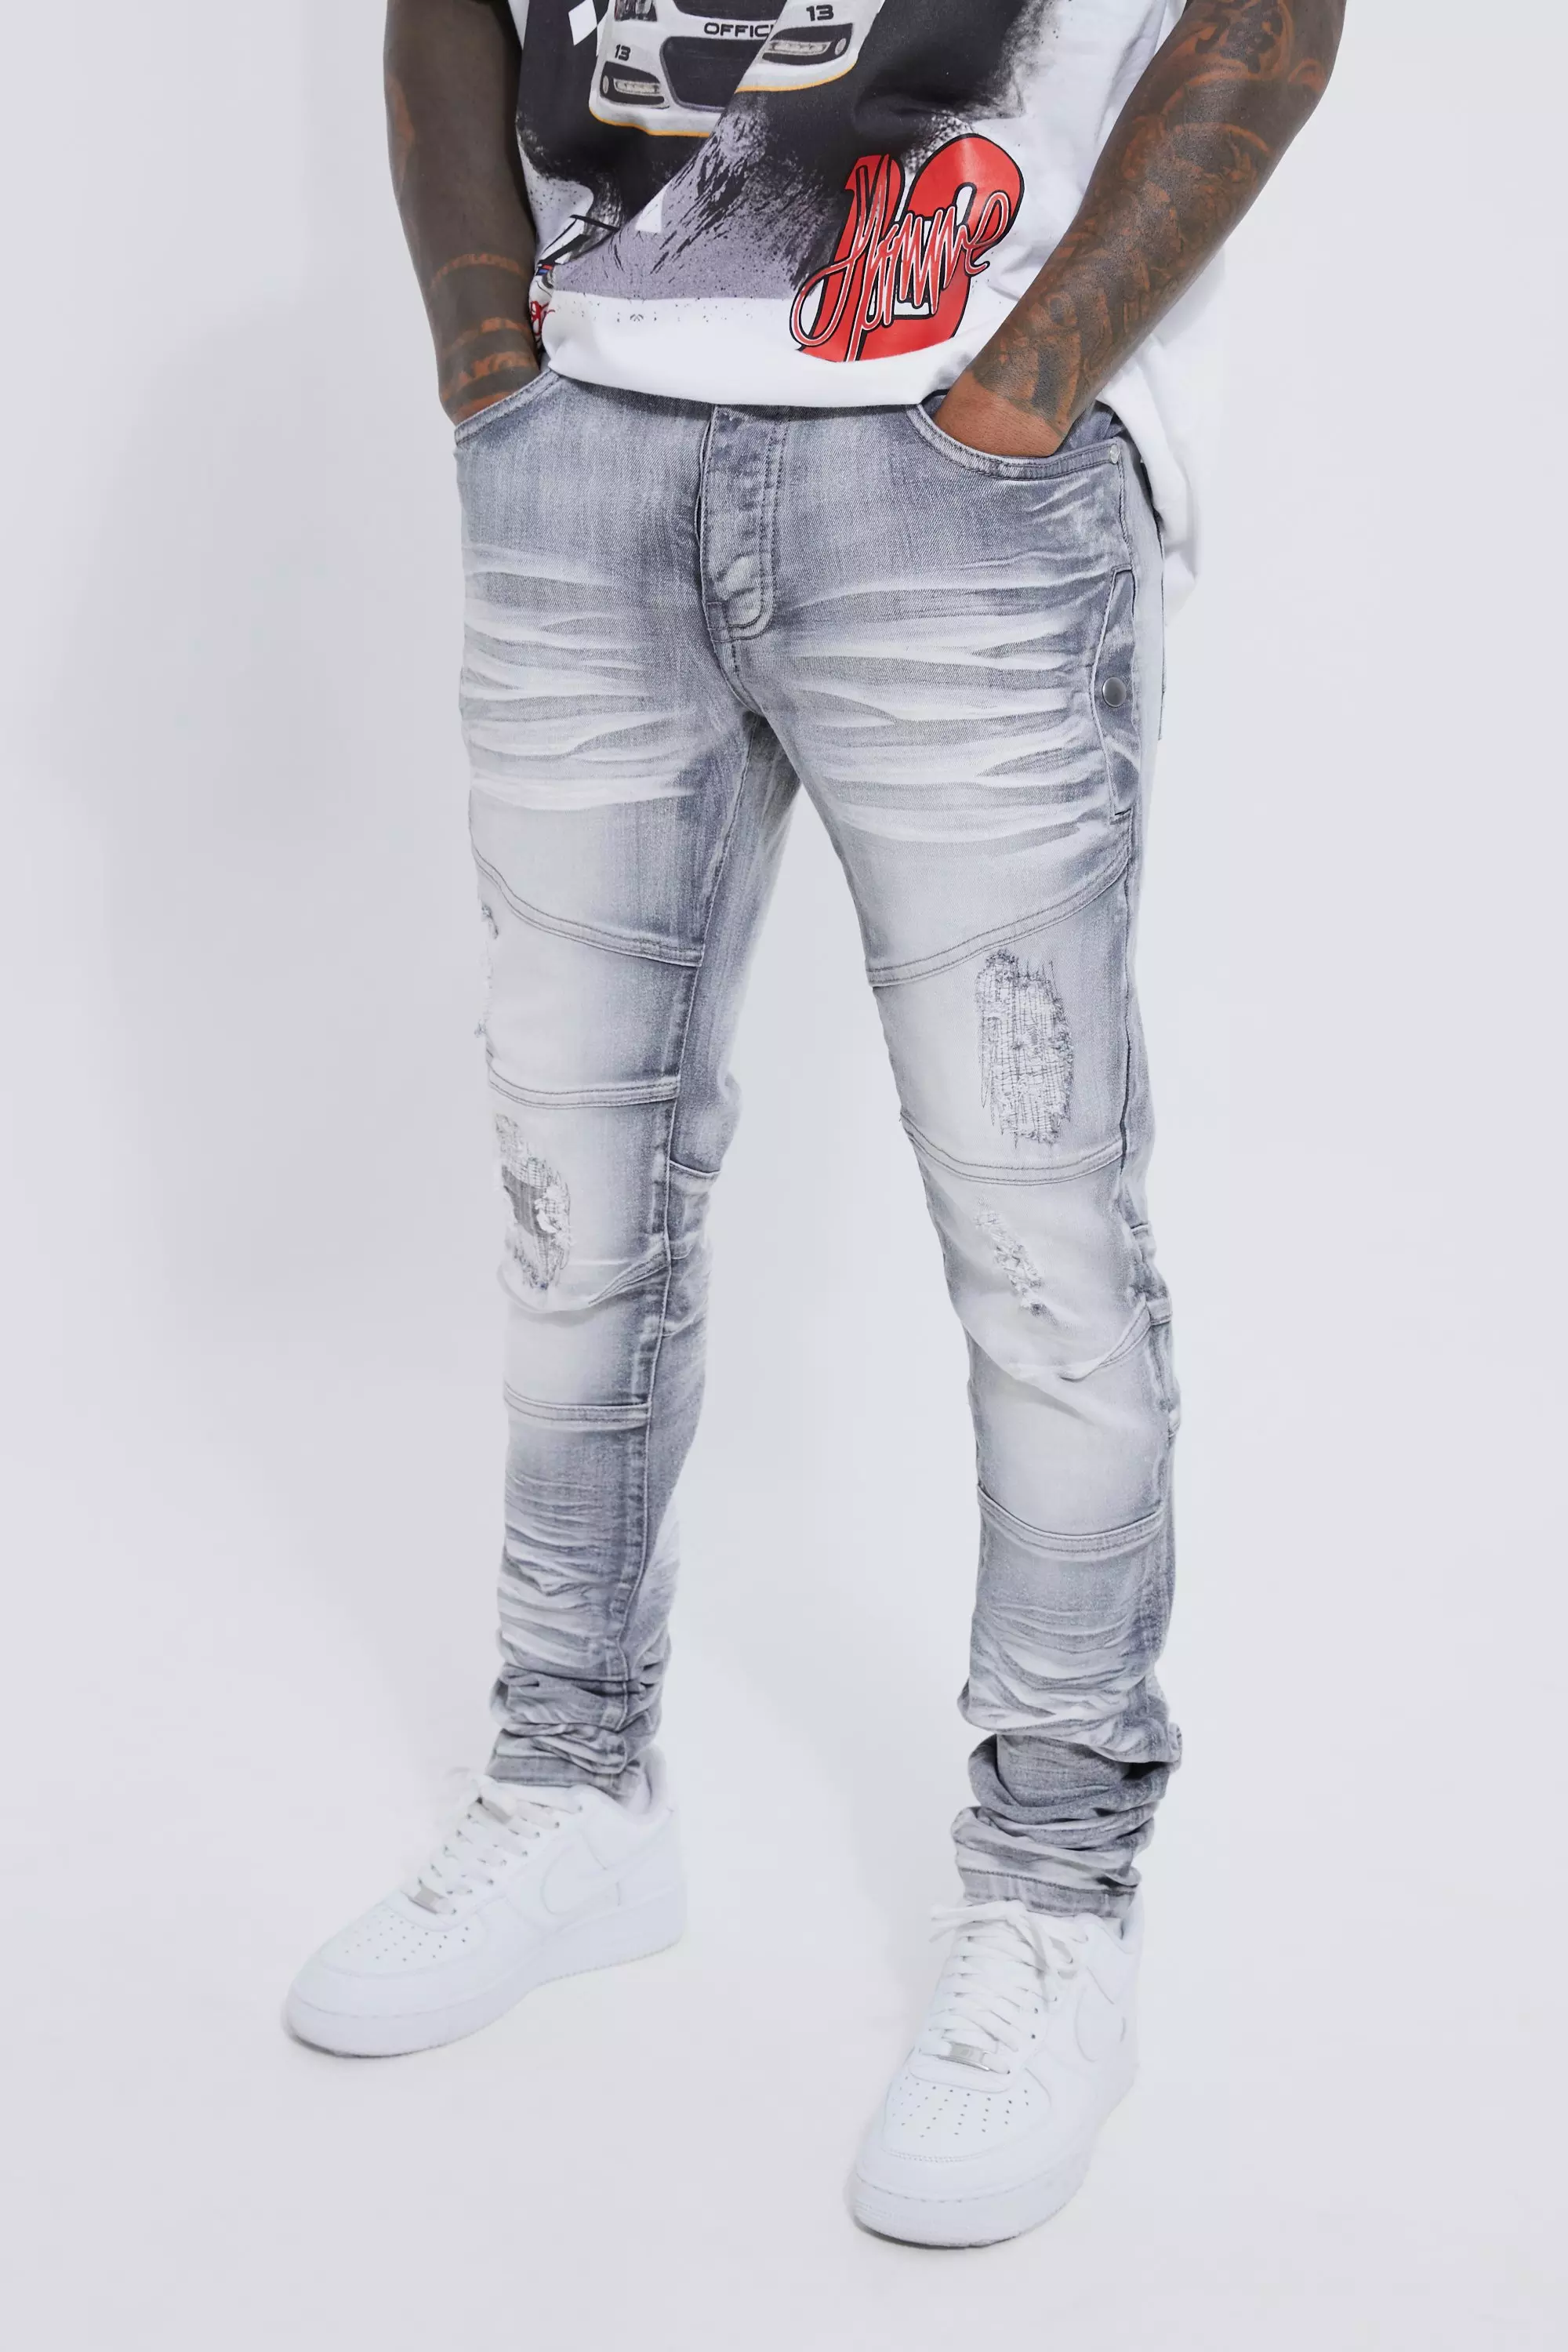 Grey Skinny Stretch Heavy Bleached Ripped Jean